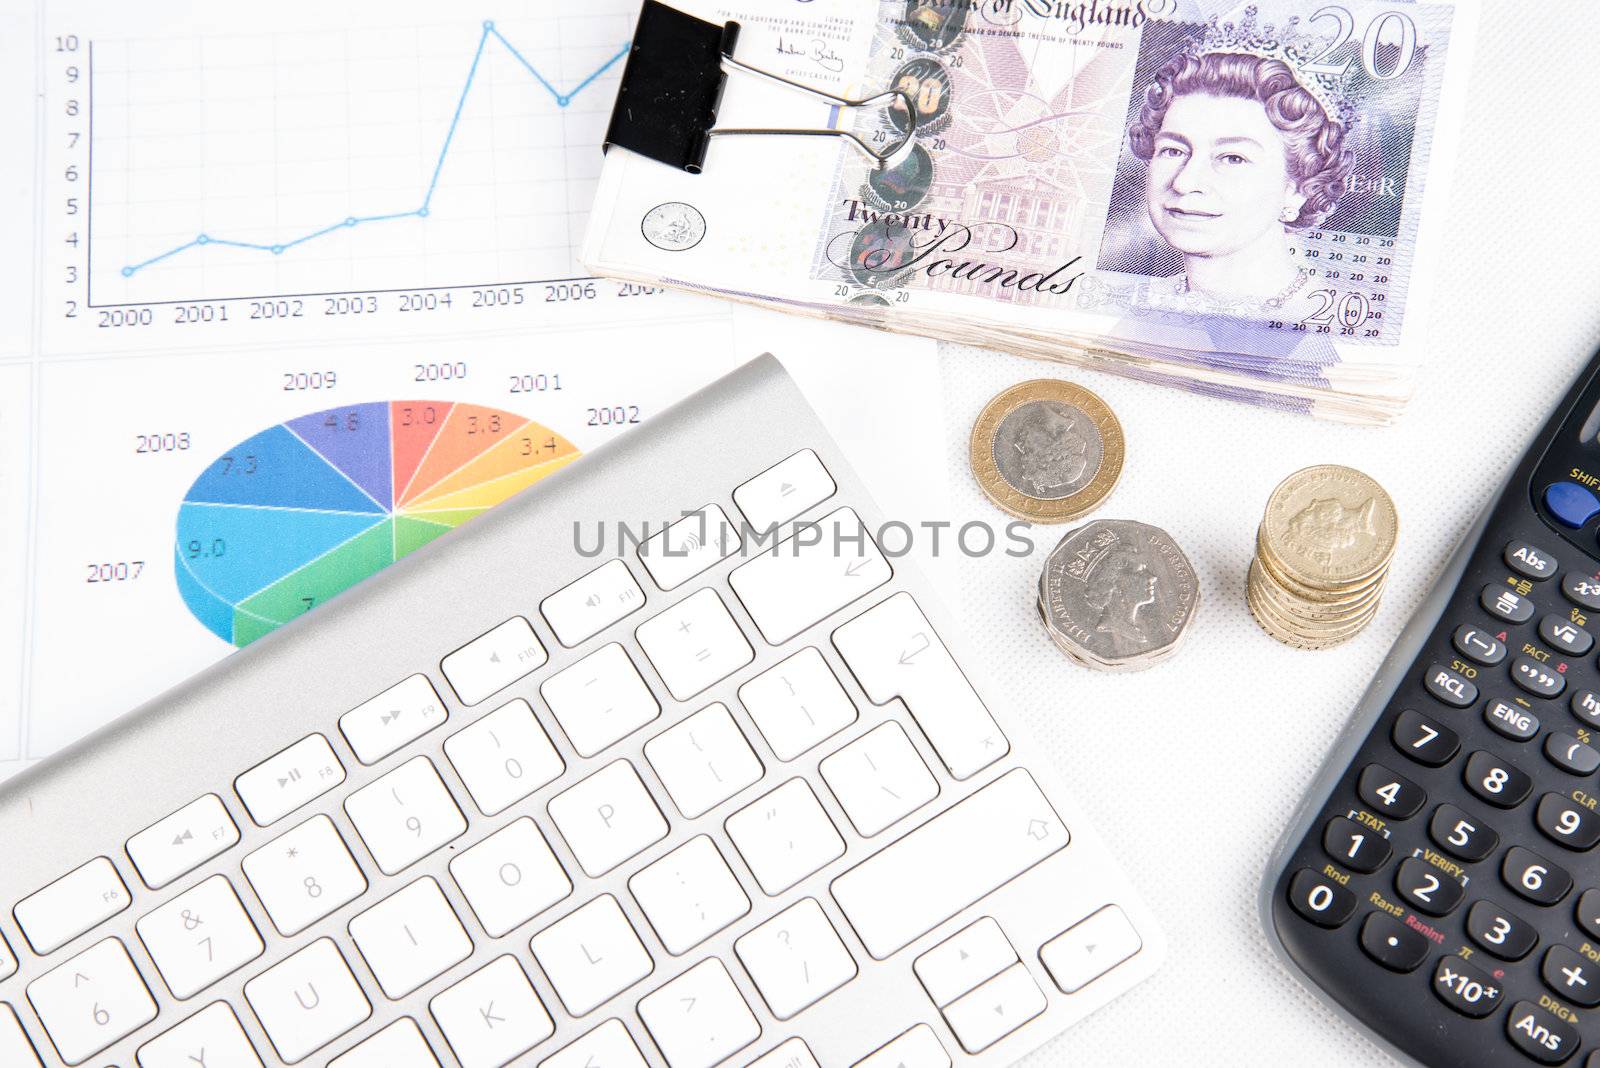 British pound sterling coins and bank notes on desk